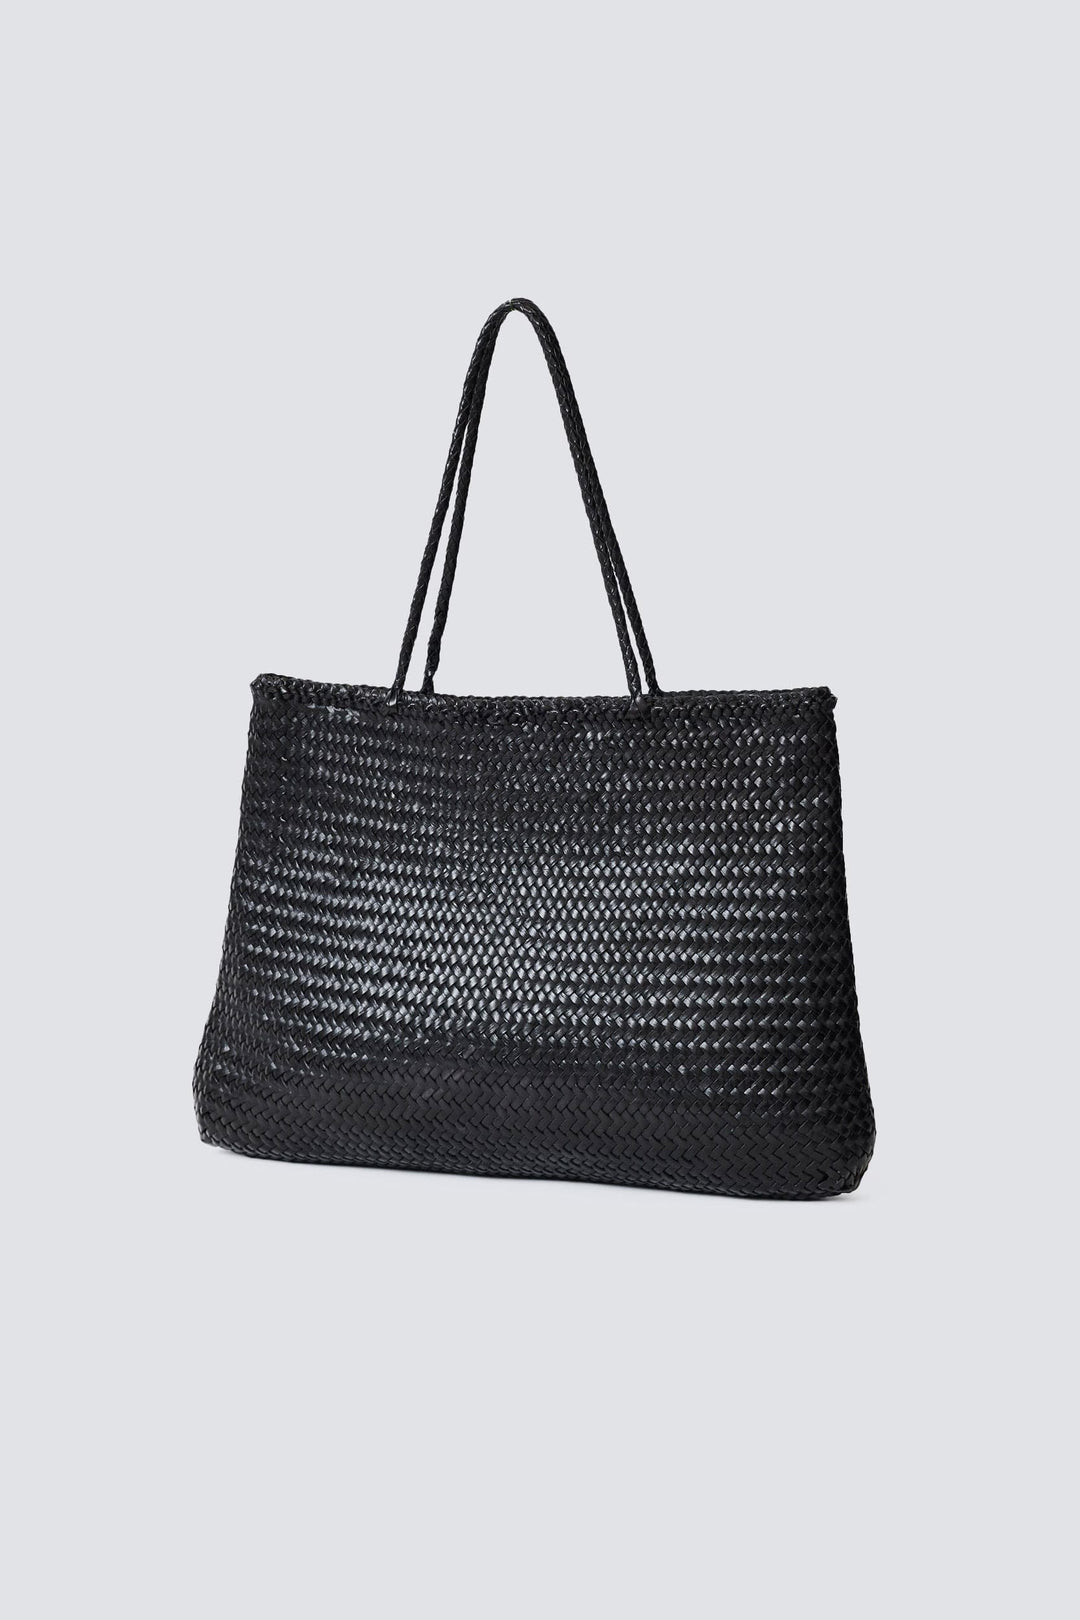 Dragon Diffusion woven leather bag handmade - Sophie Large Black